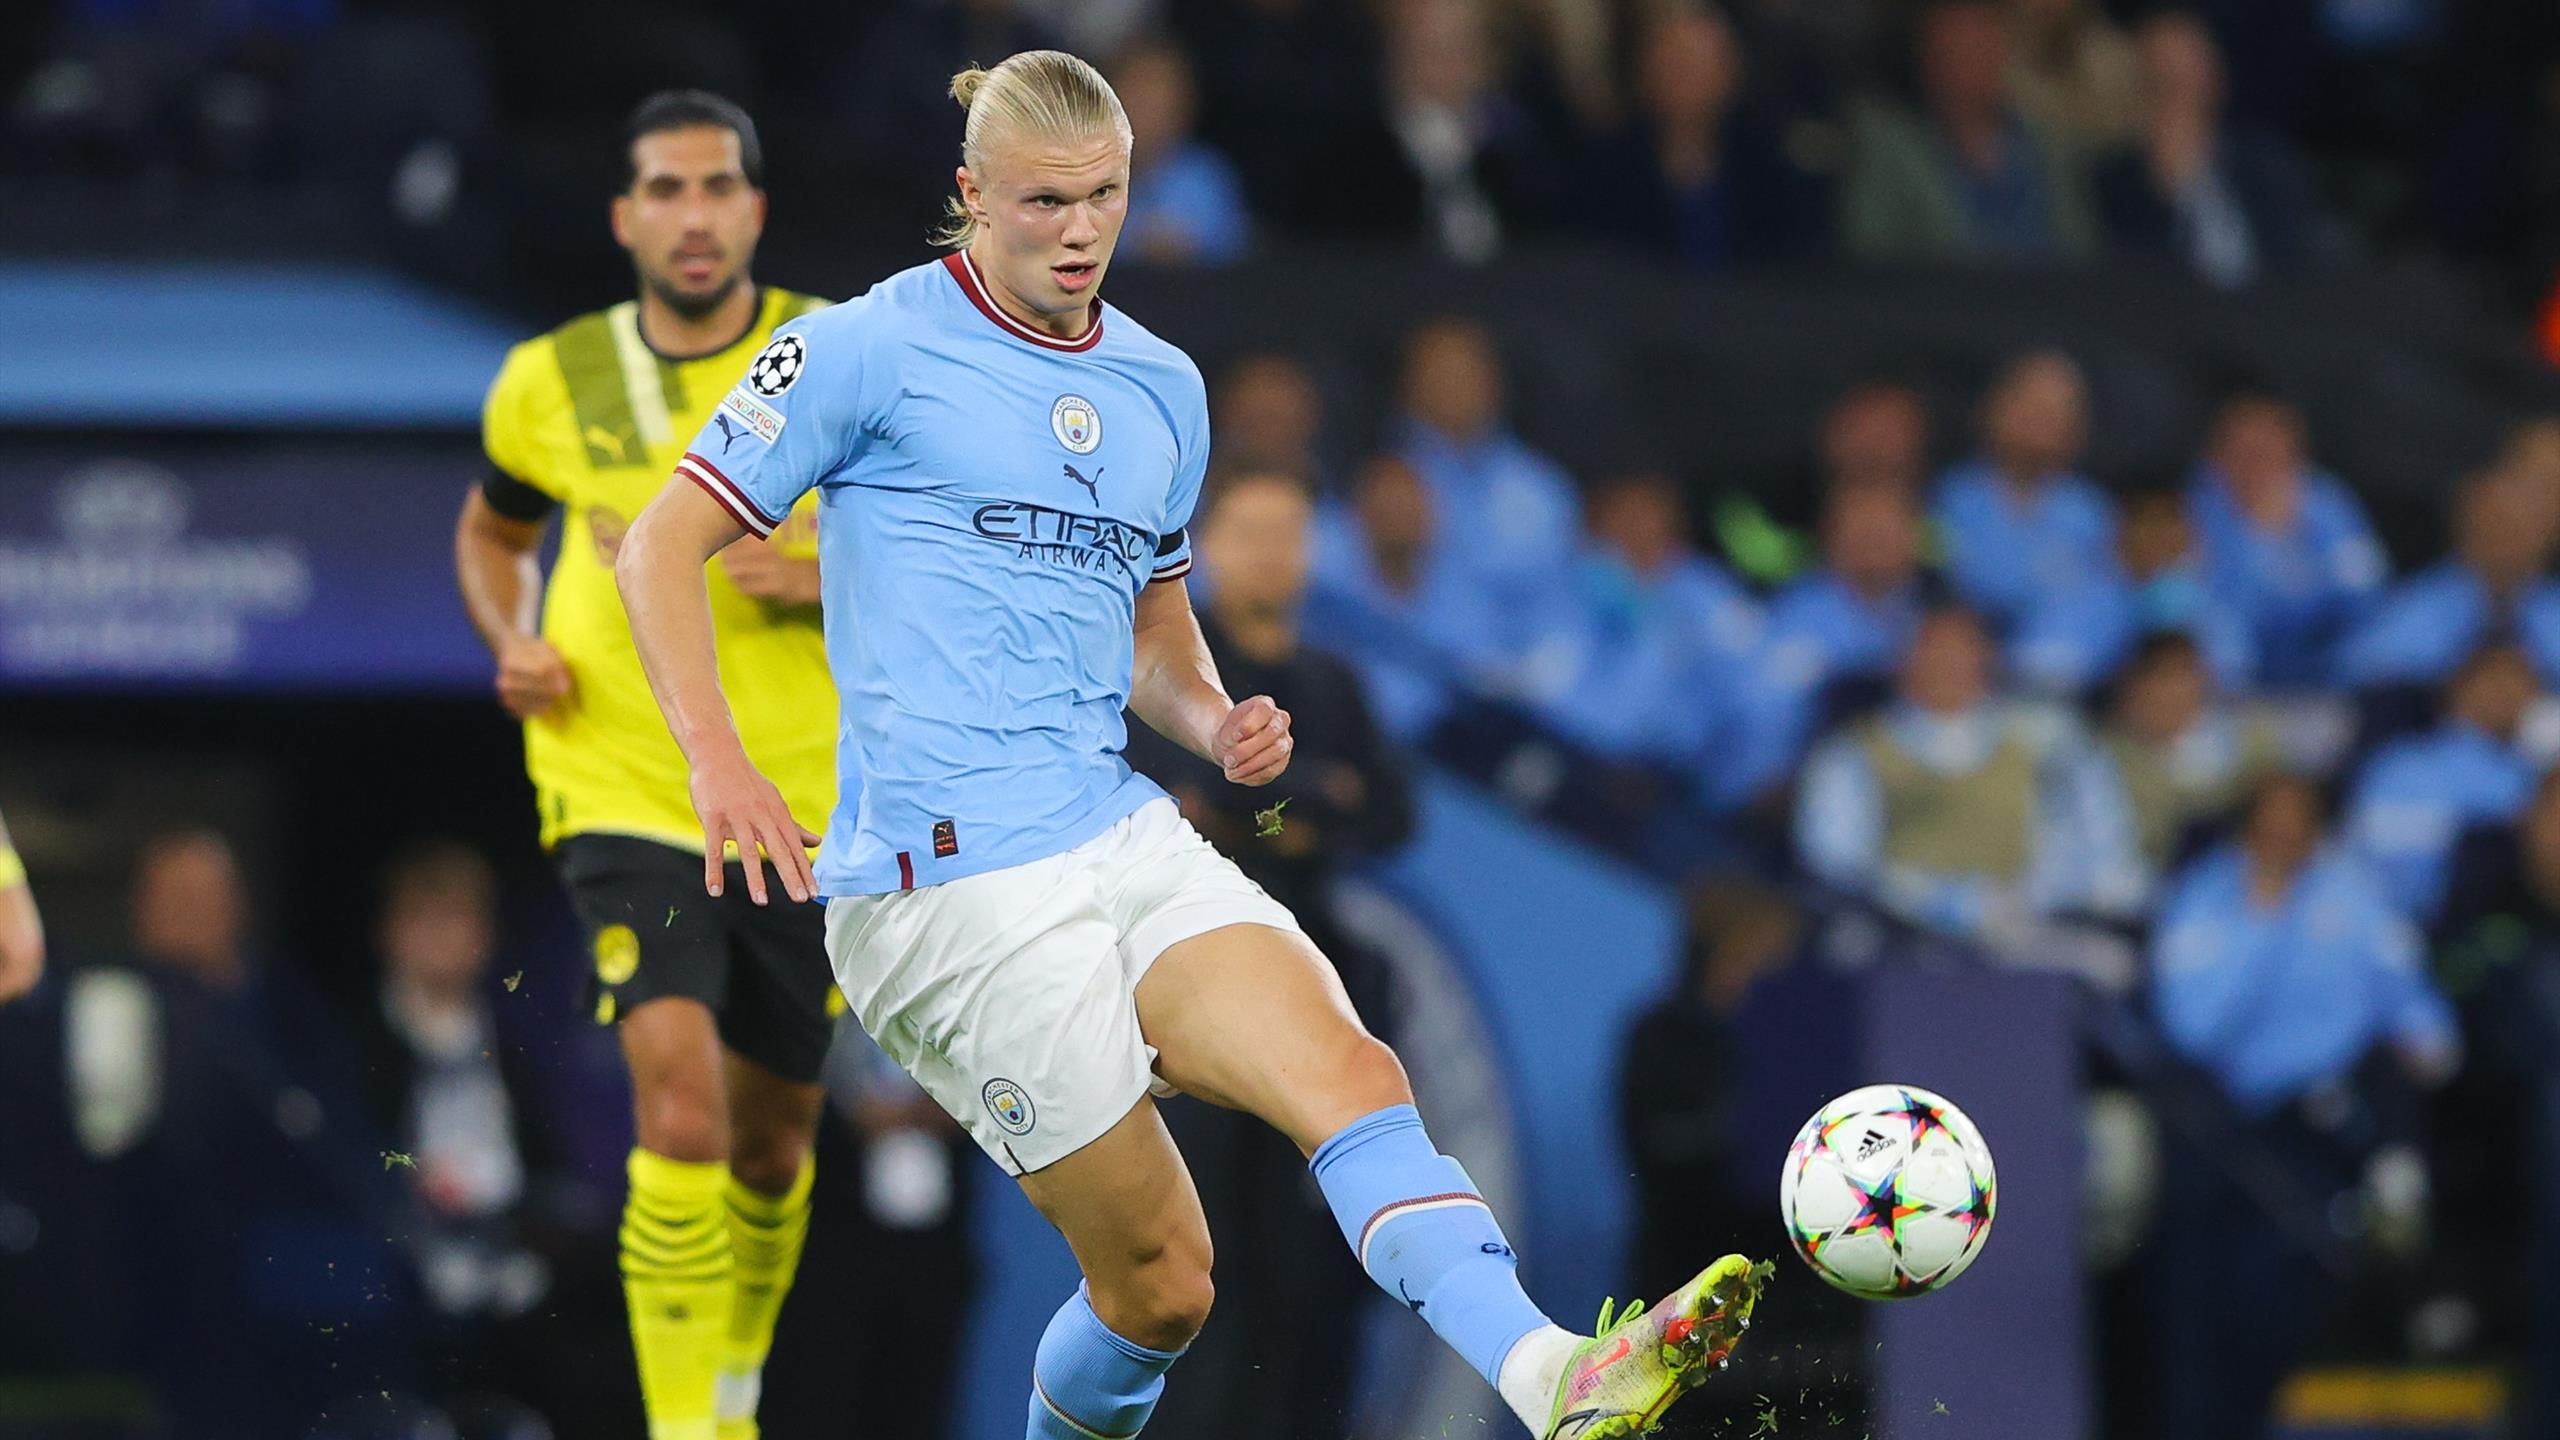 How to watch Dortmund v Man City in the Champions League - TV channel, live stream details, kick-off time